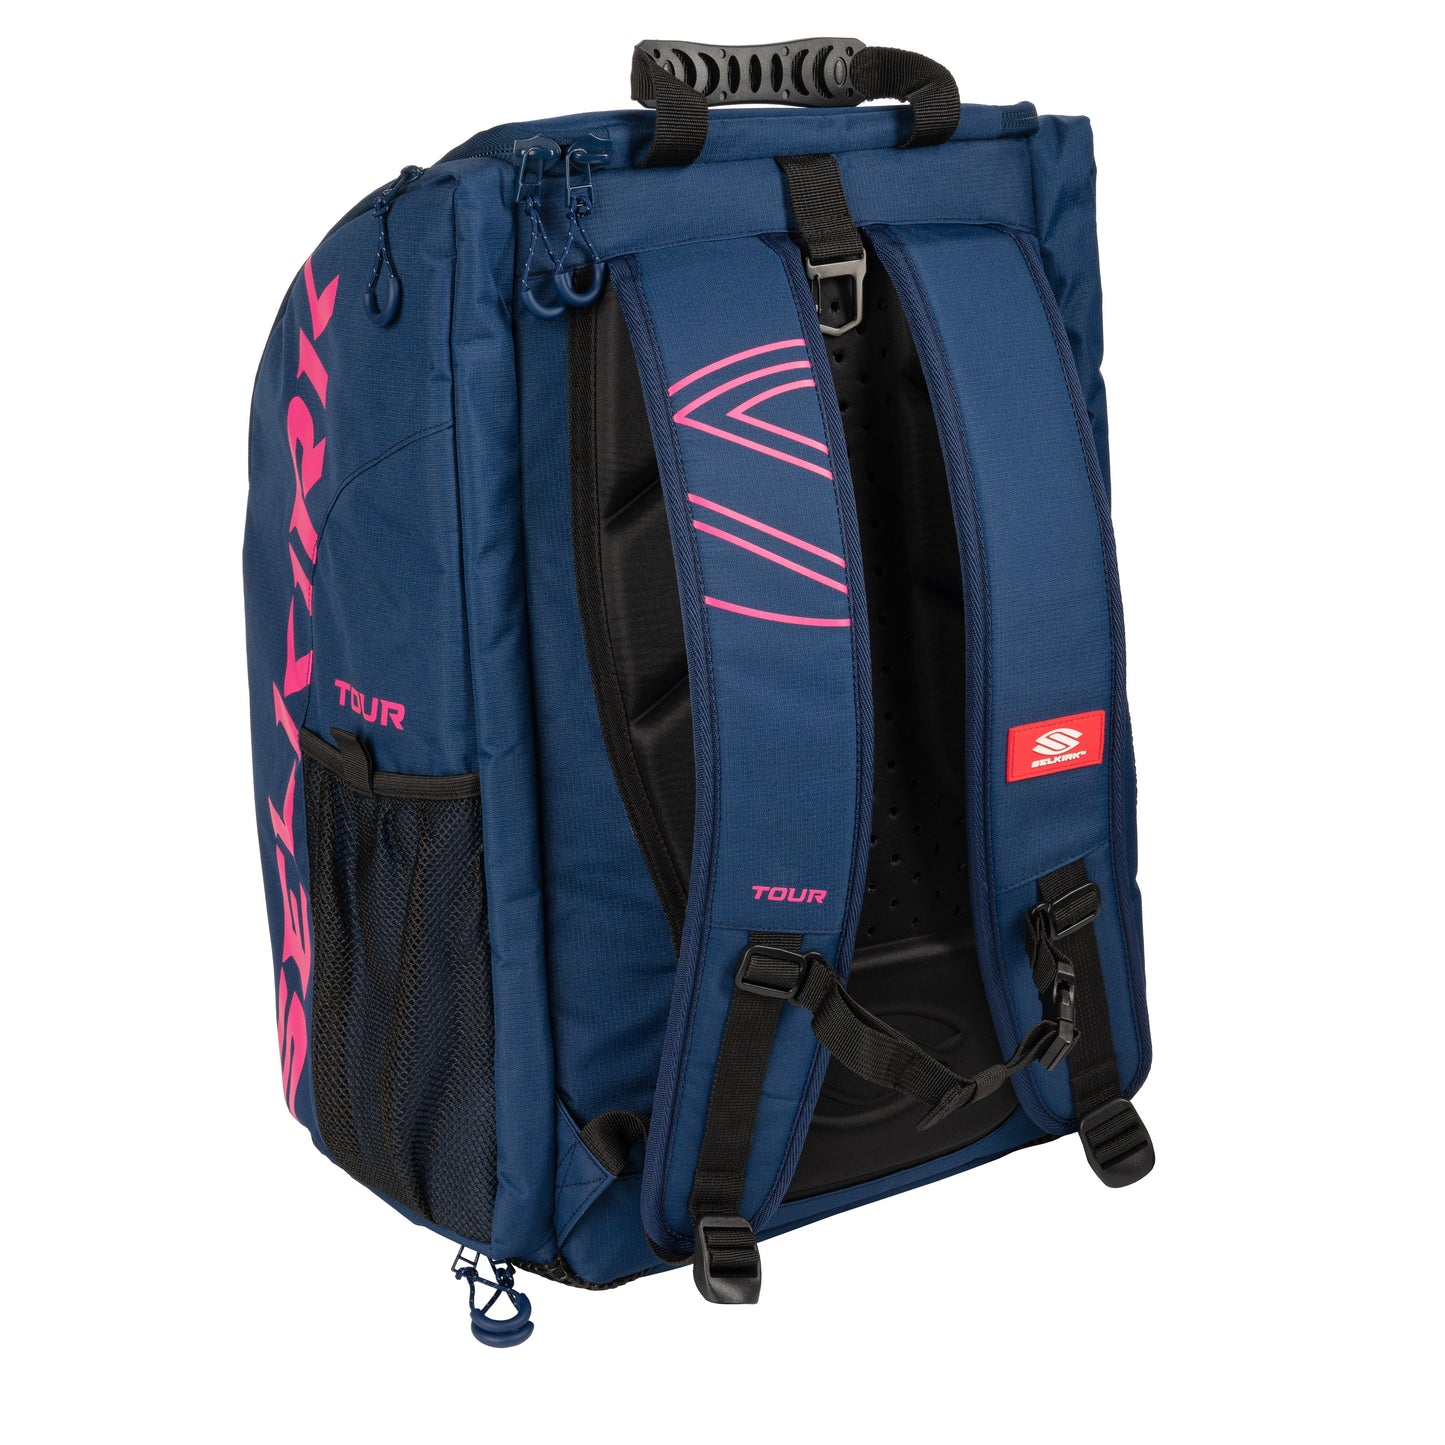 A Selkirk Core Series Tour Backpack Pickleball Bag with a shoulder strap.